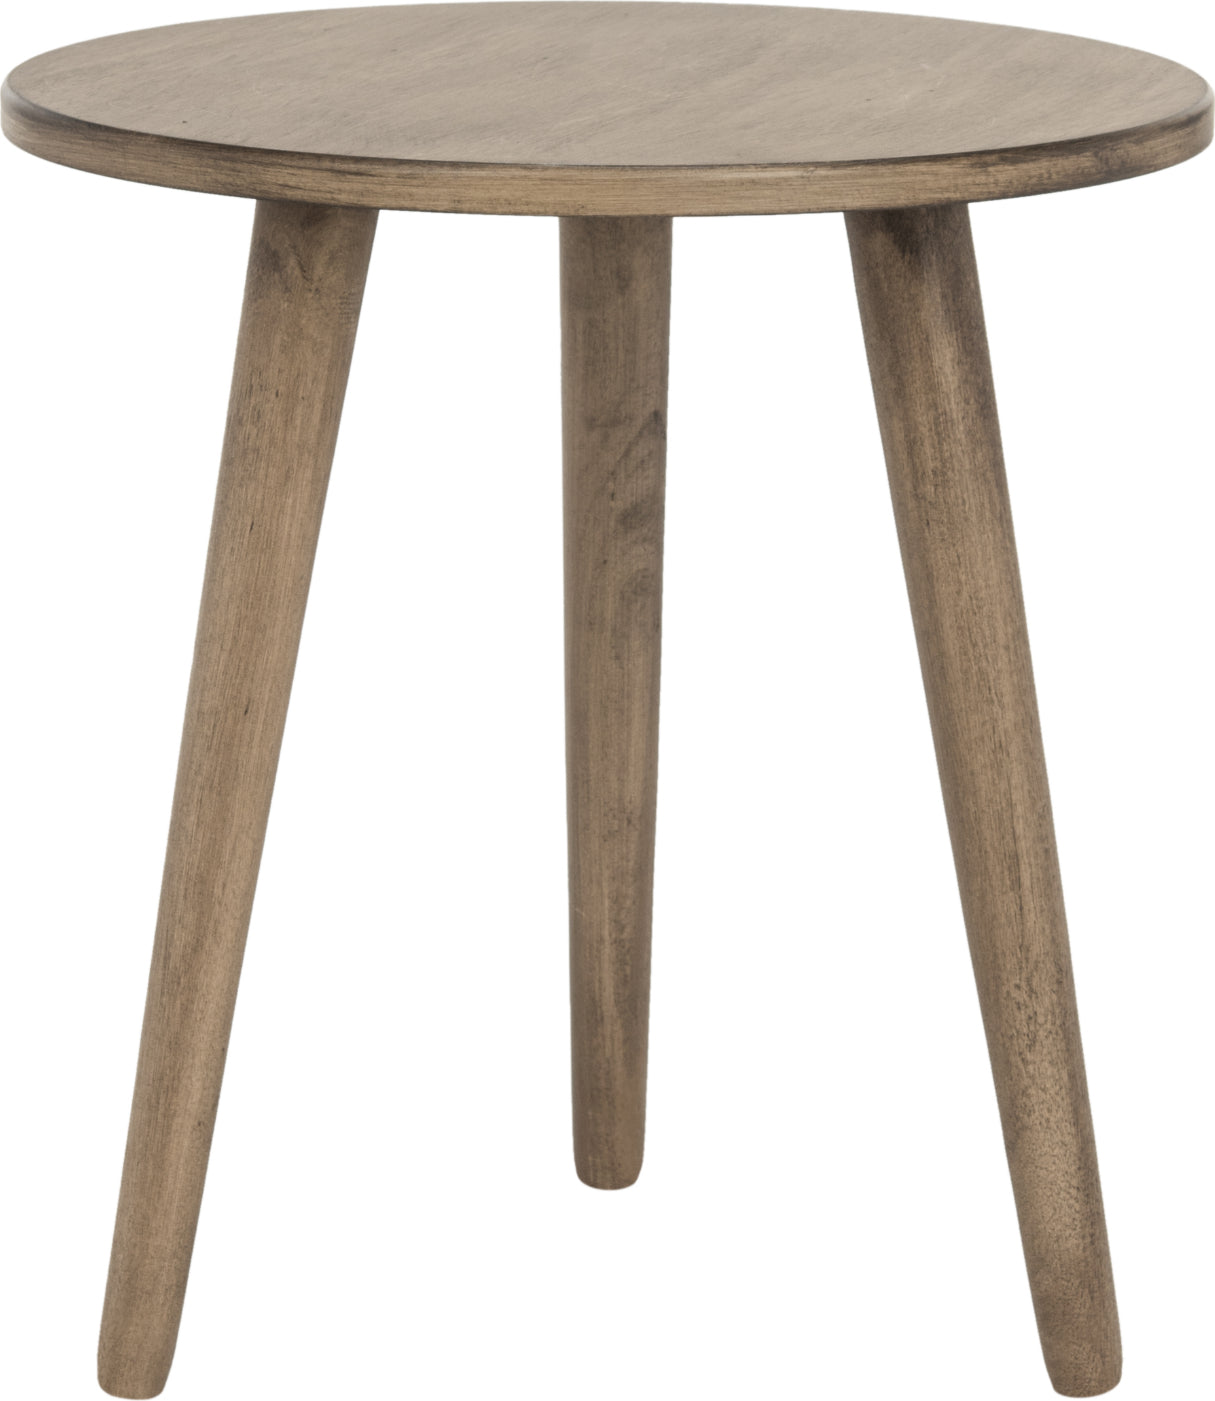 Safavieh Orion Round Accent Table Desert Brown Furniture main image